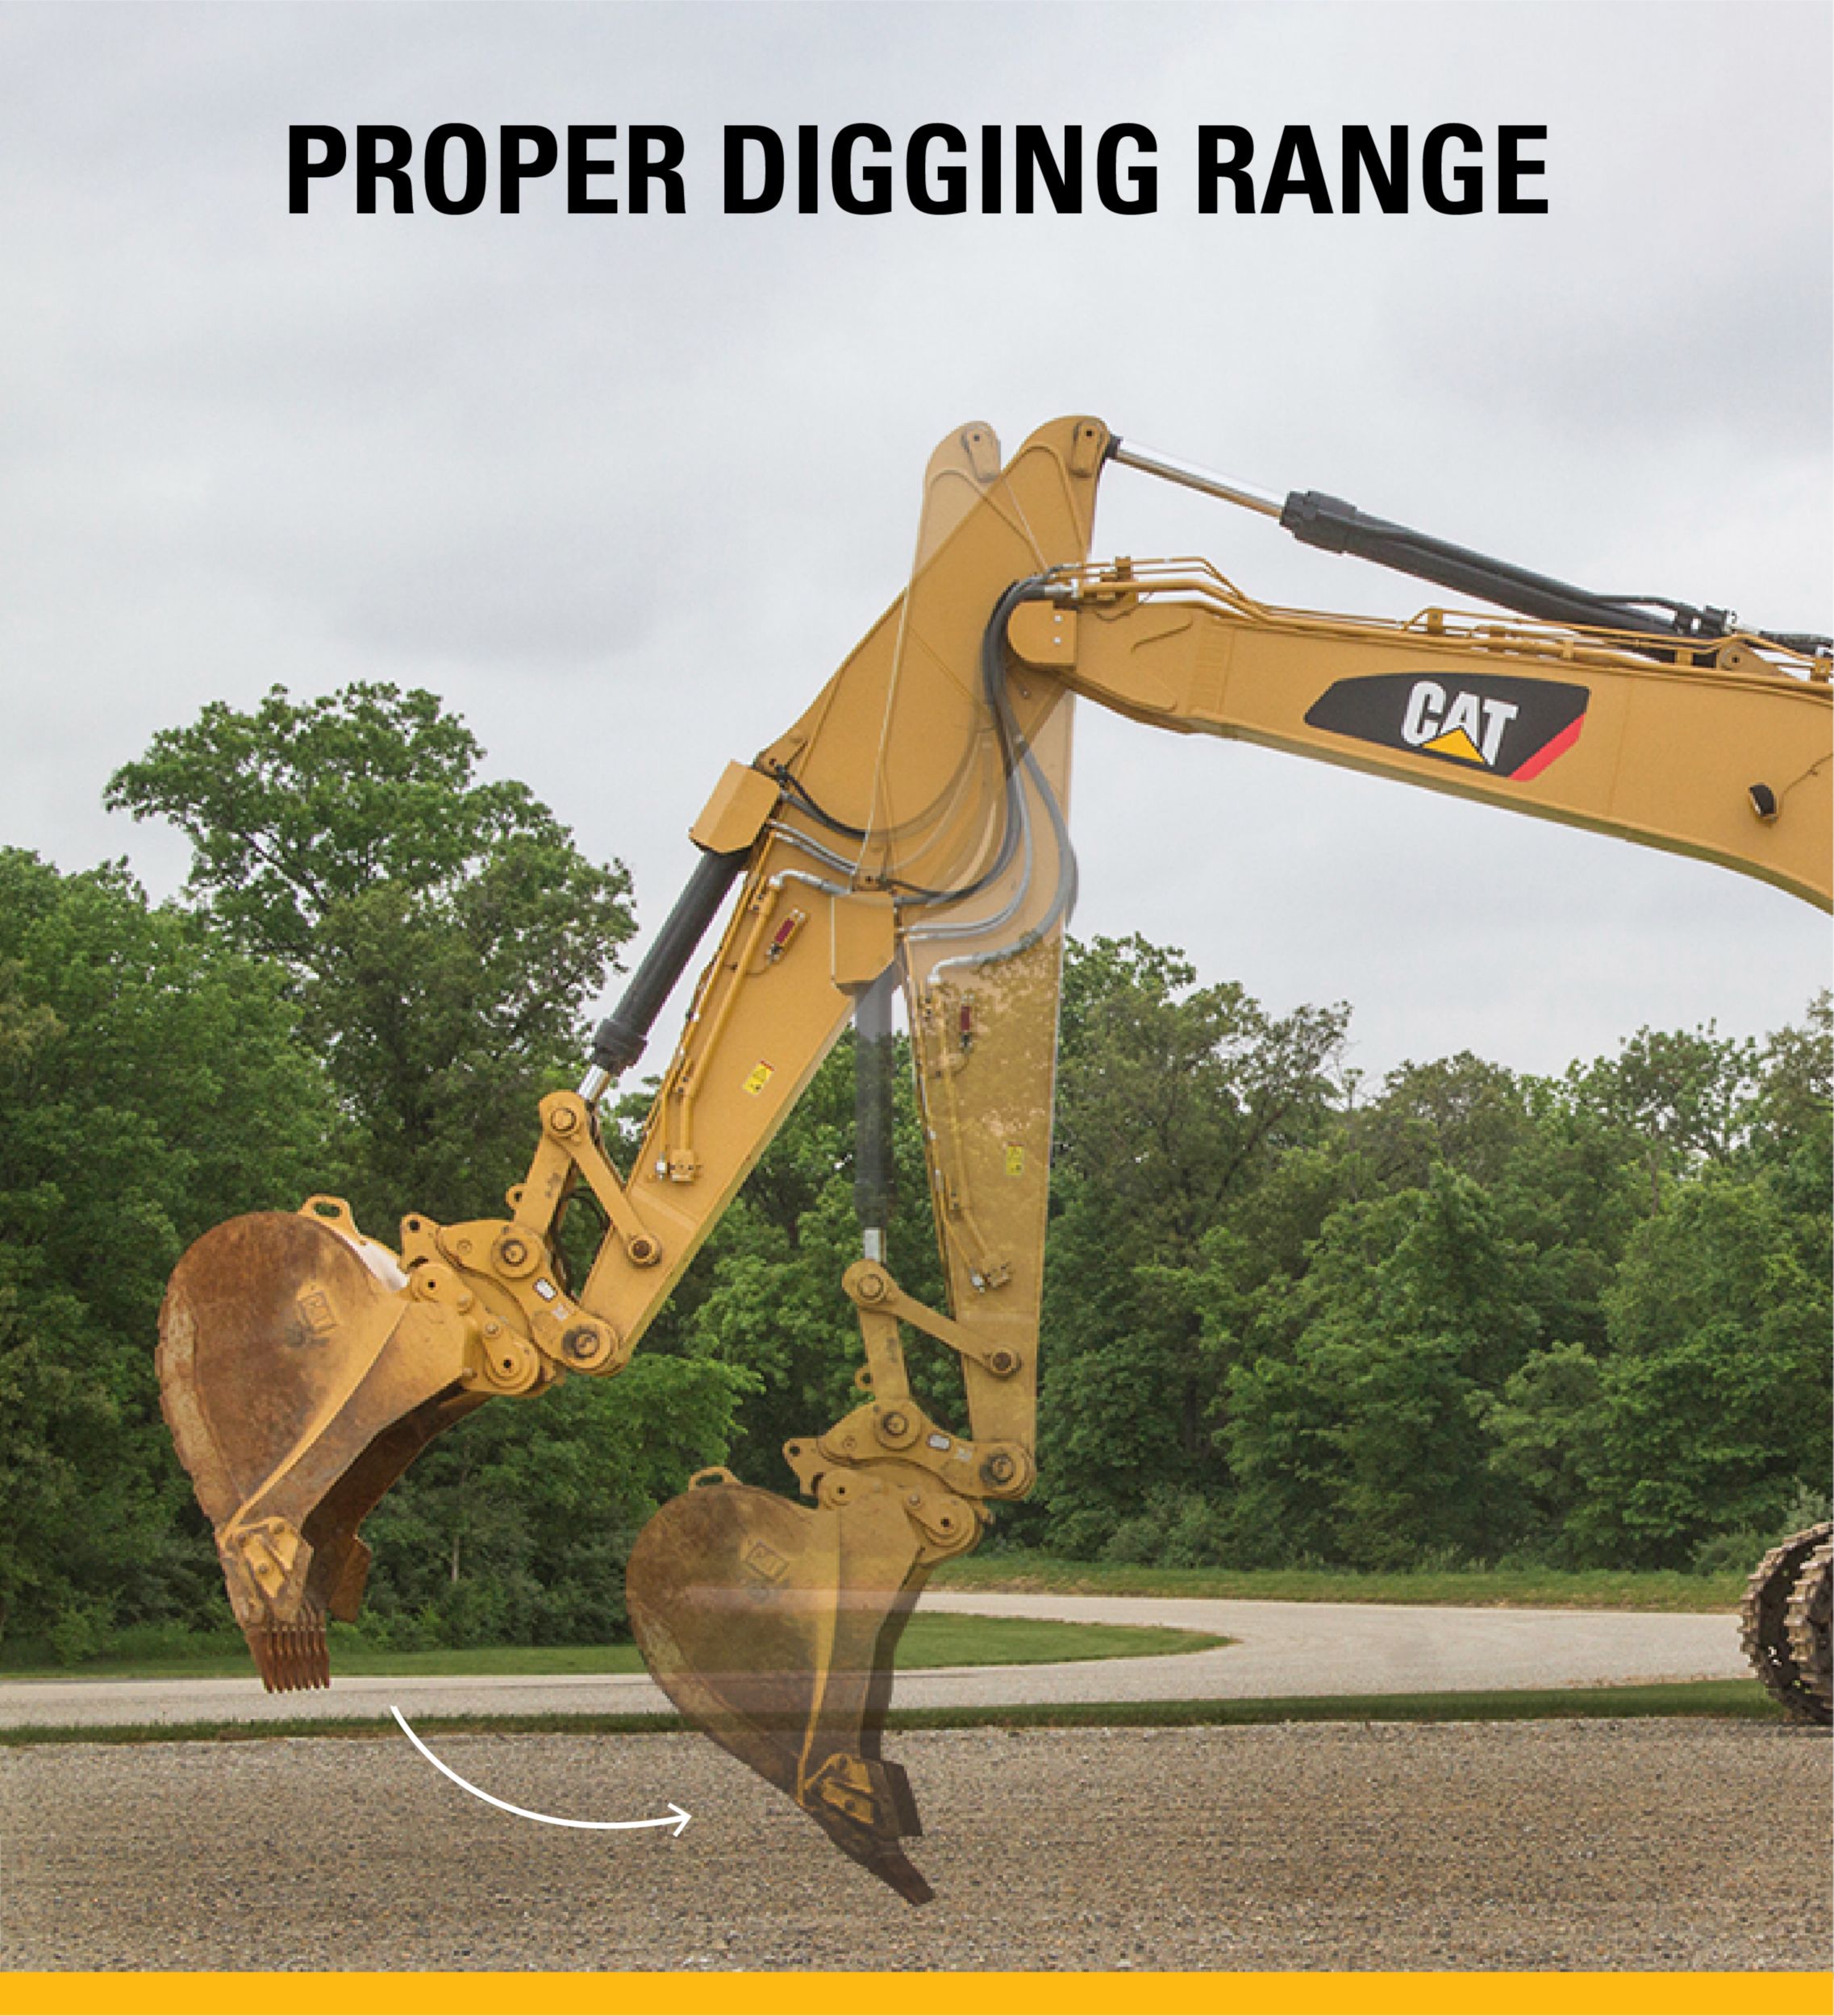 Set your excavator facing the work area. Avoid digging over the side.